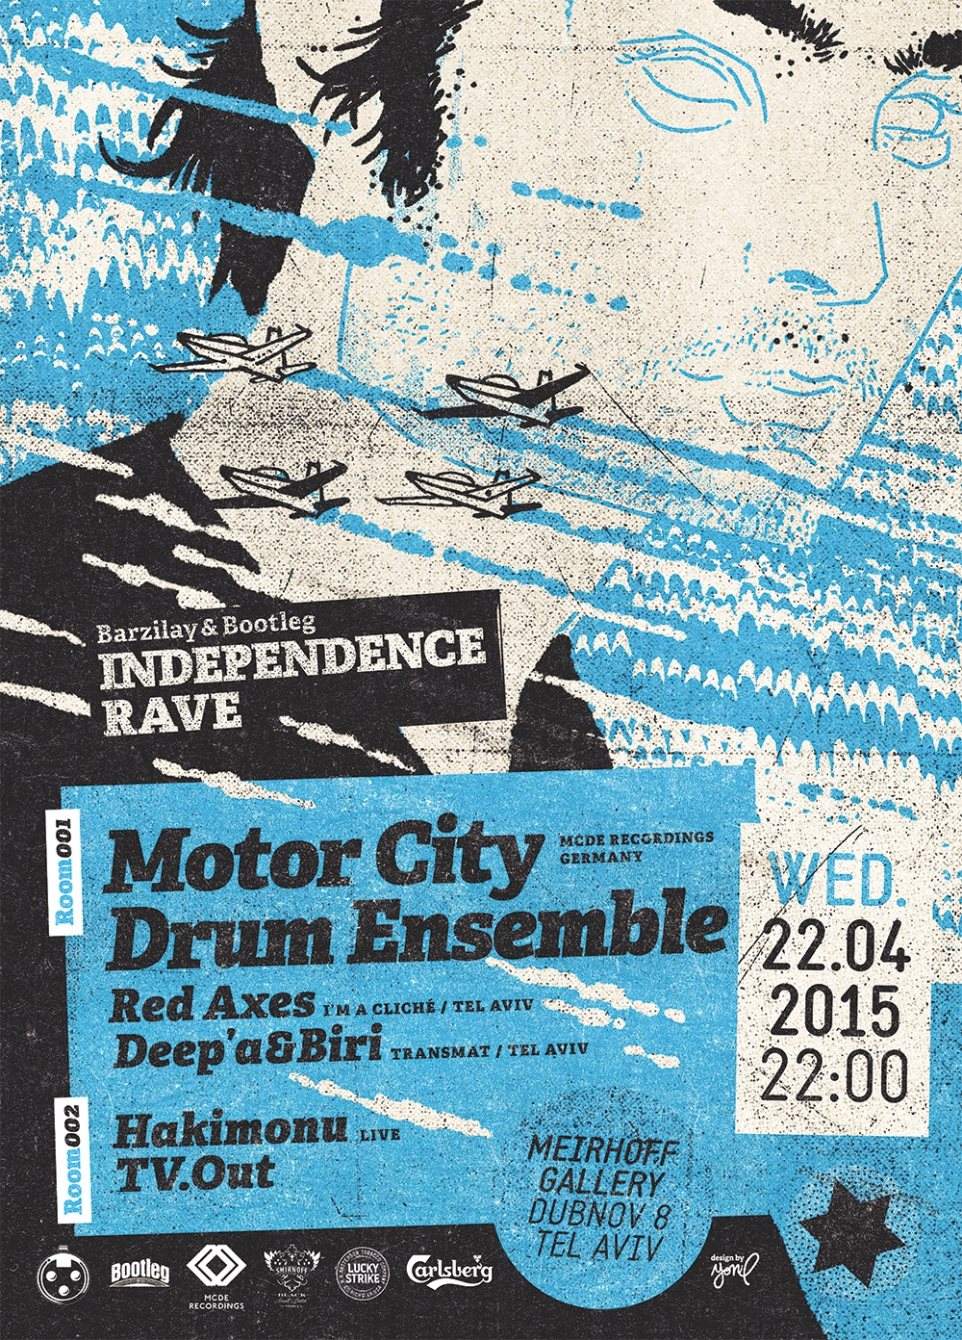 Barzilay & Bootleg Independence Rave with Motor City Drum Ensemble - Página frontal